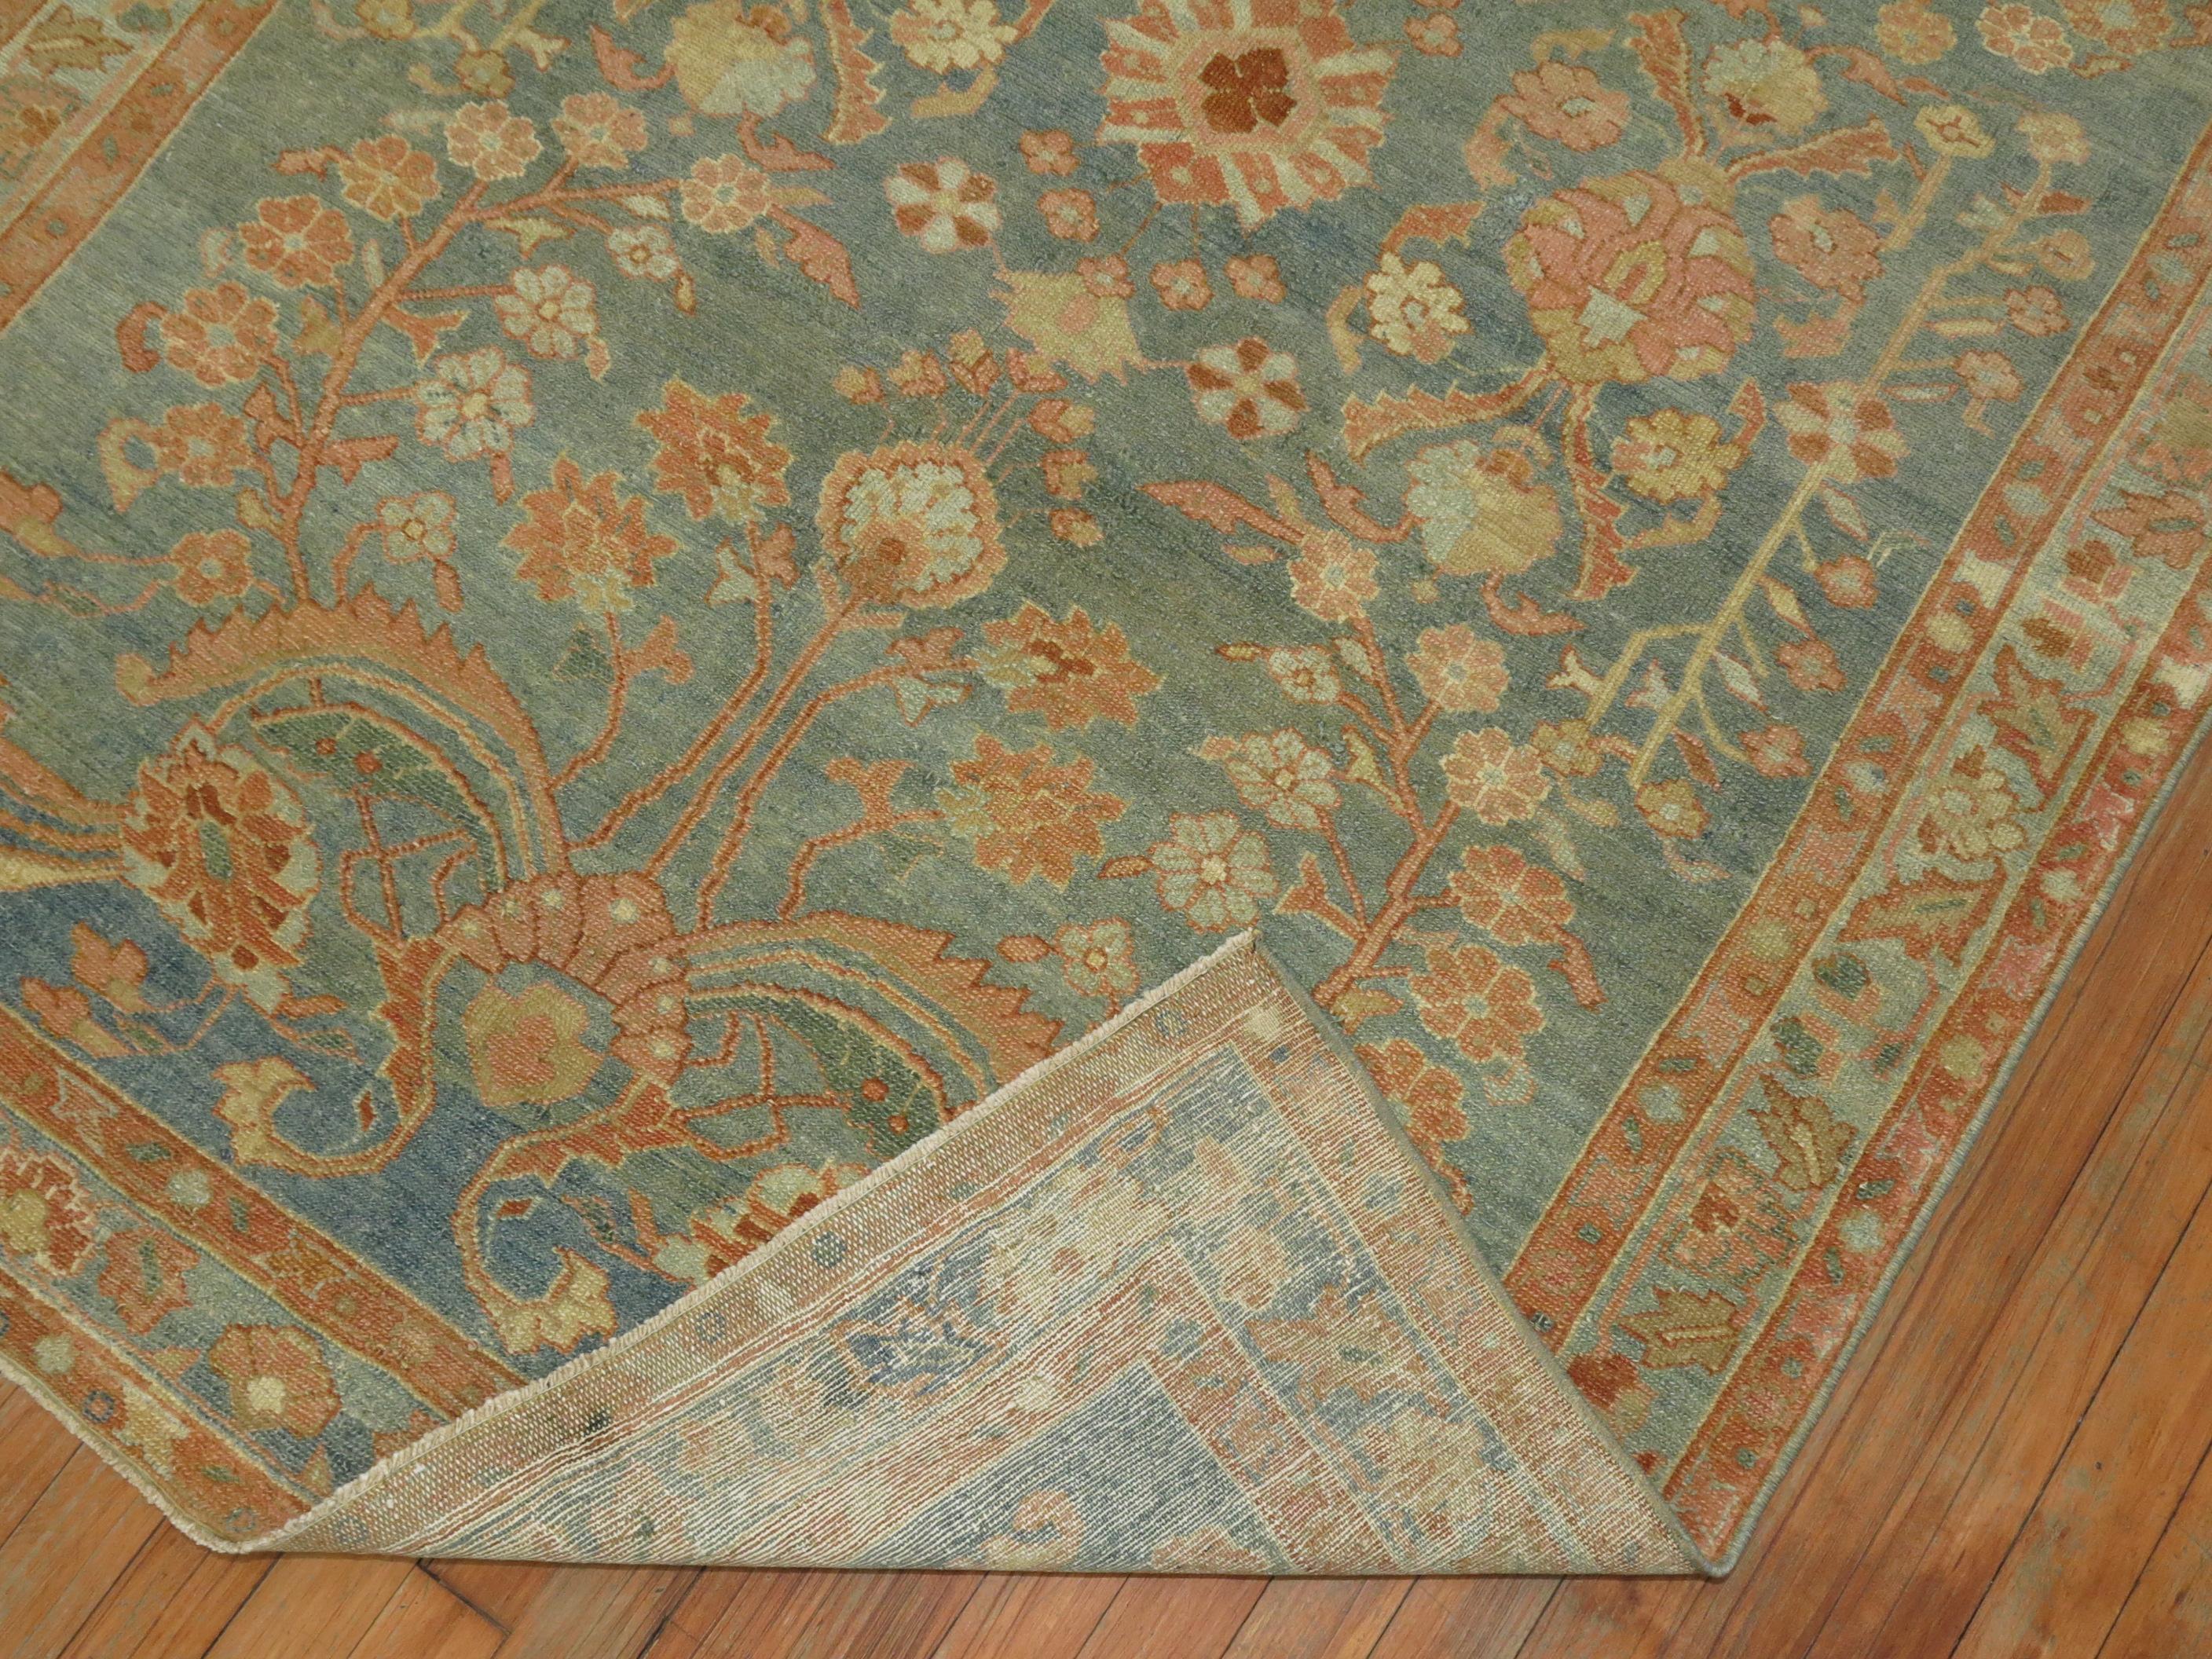 20th Century Soft Green Apricot Persian Malayer Rug